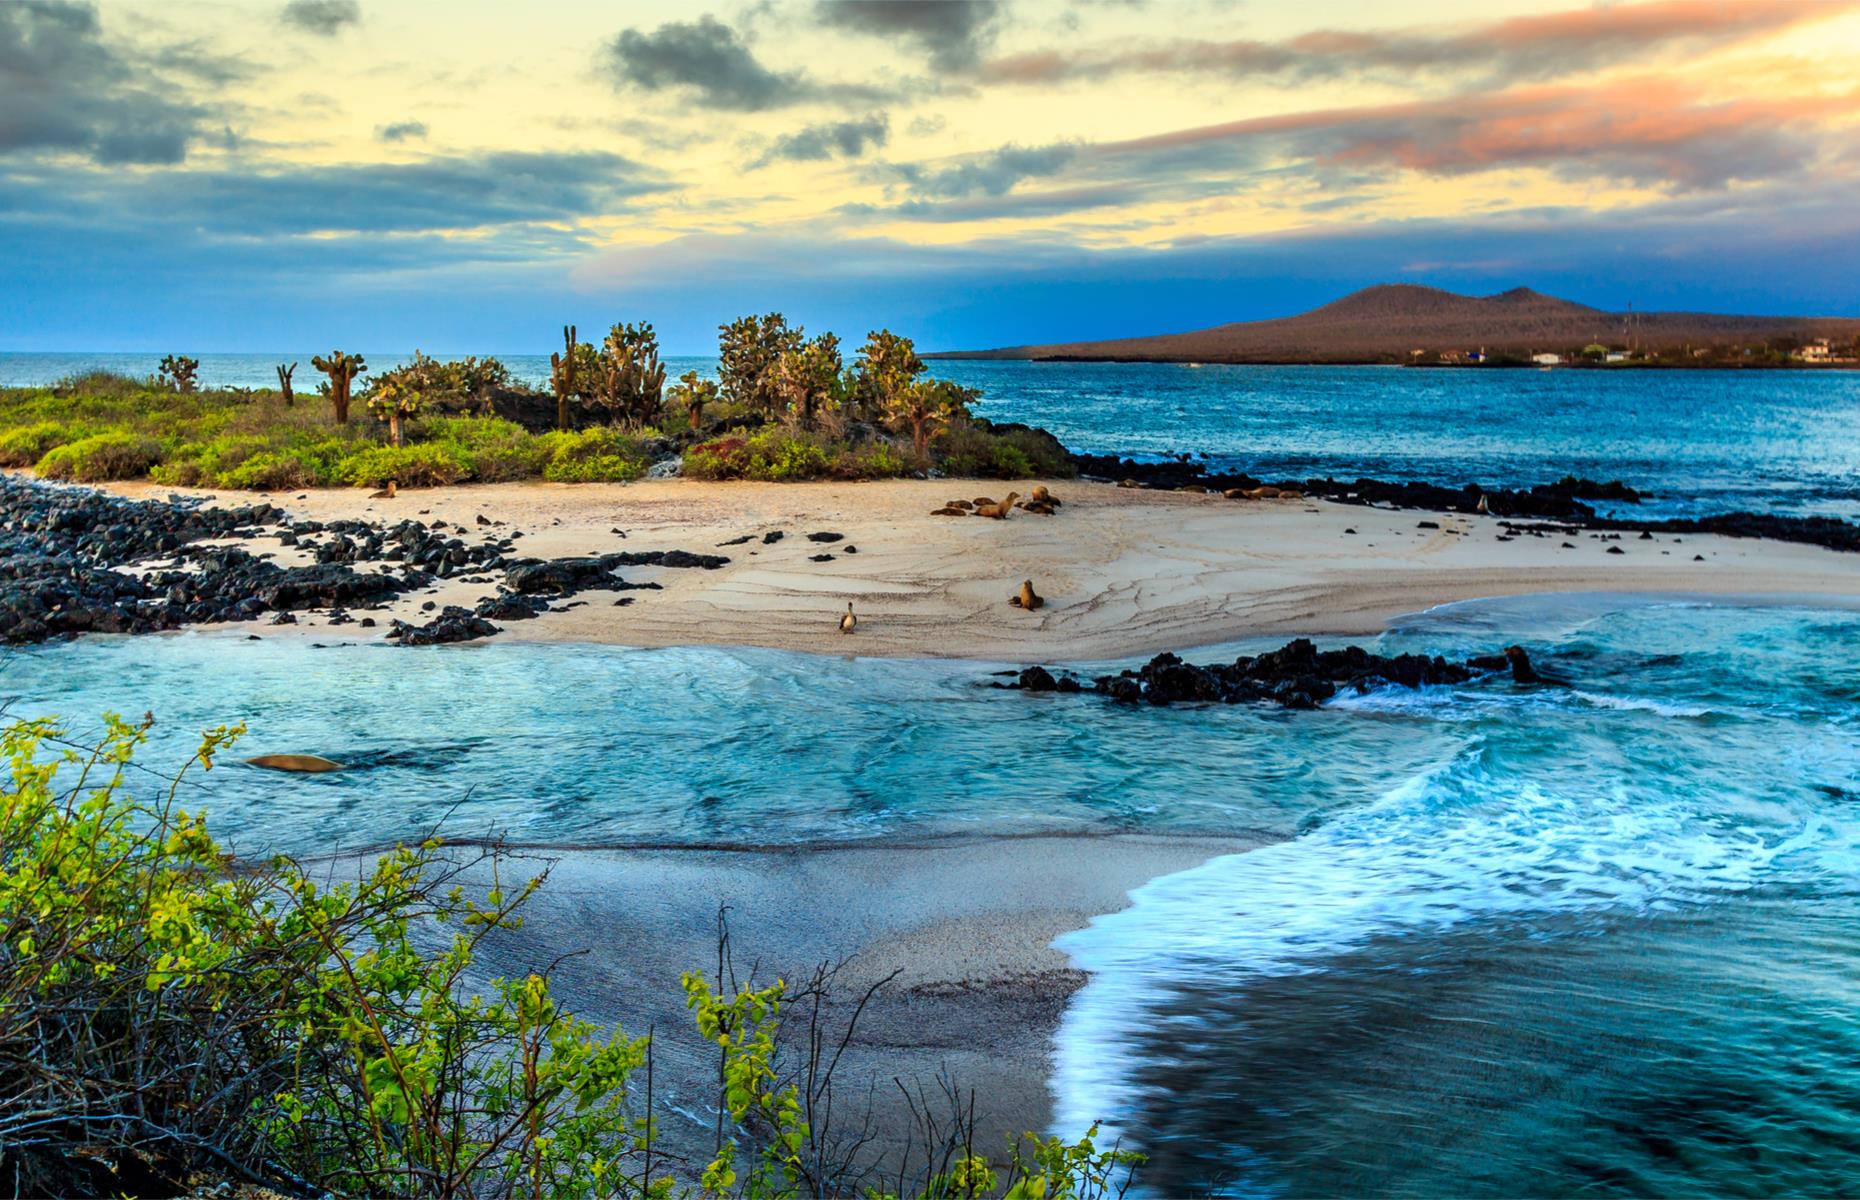 <p>Once a remote and isolated archipelago, the Galápagos have experienced a boom in tourism with people desperate to see their natural wonders. There were 1,000 tourists per year in the 1960s, when tourism first began, which swelled to more than 260,000 in 2022. There are major concerns about the impact on the once-pristine environment. So much so that they were listed as an endangered UNESCO World Heritage Site in 2007 due in part to the impact of tourism. </p>